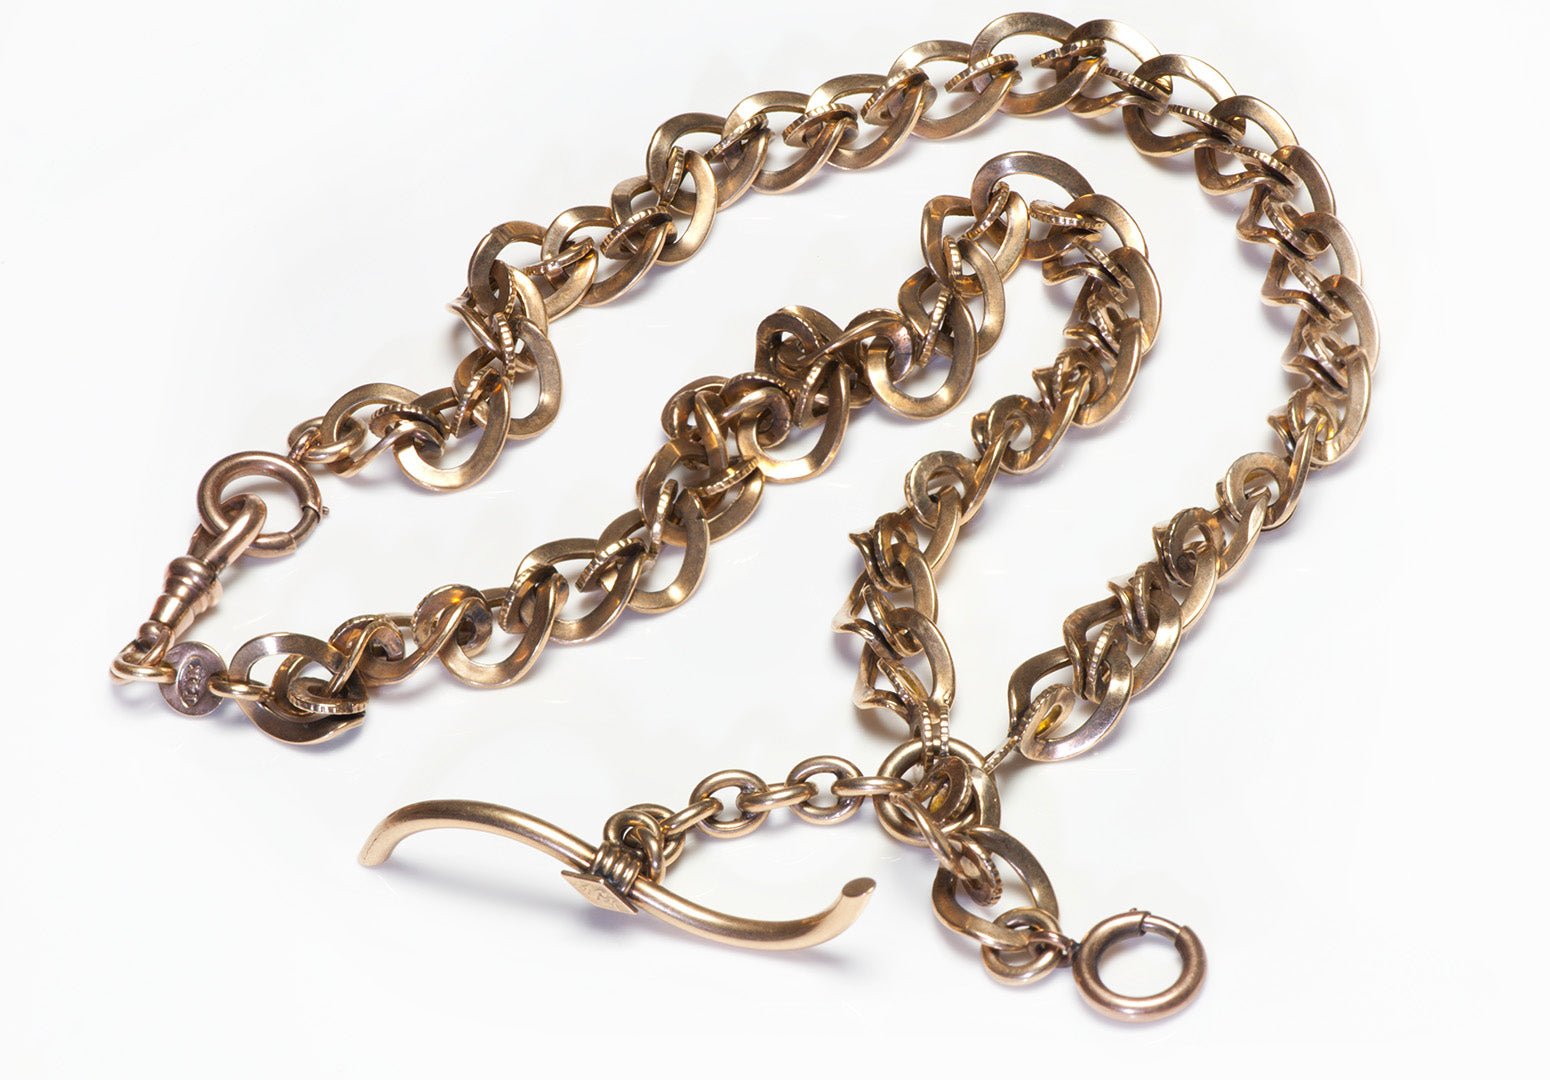 Antique Gold Large Ornate Link Fob Watch Chain - DSF Antique Jewelry